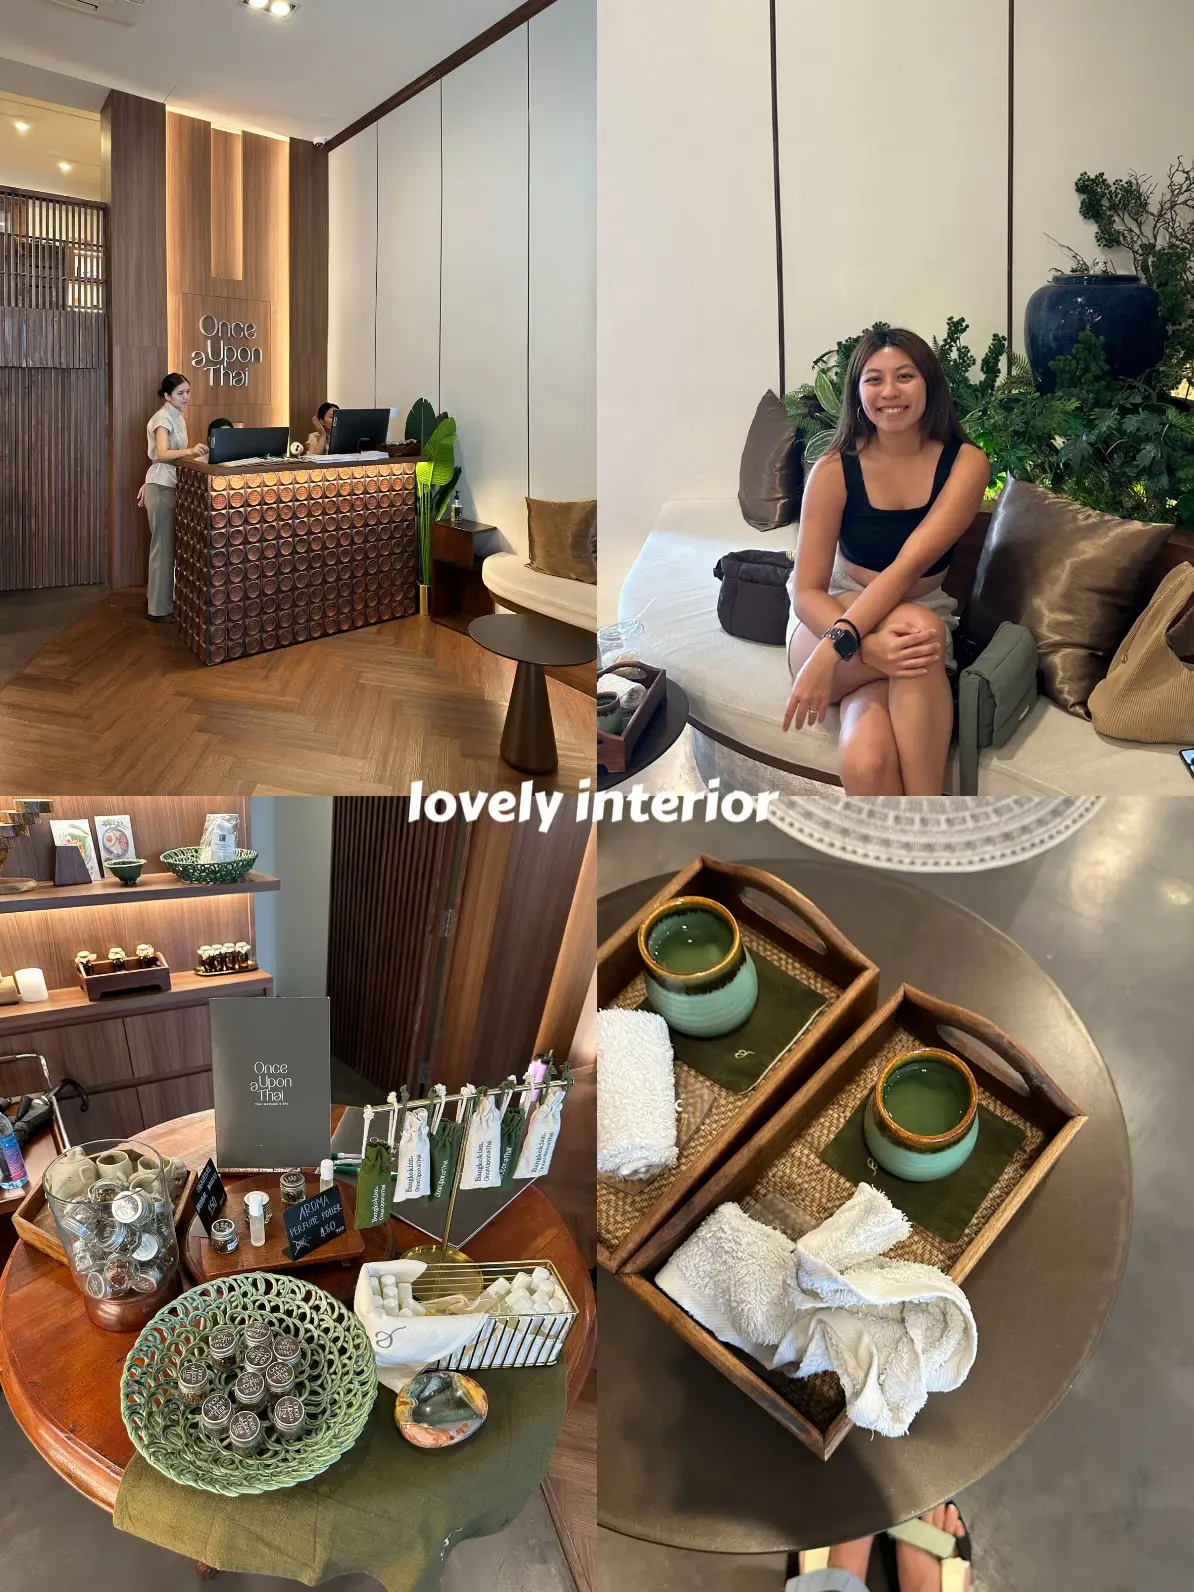 Had the most amazing spa 🤩 SELF CARE! 's images(1)